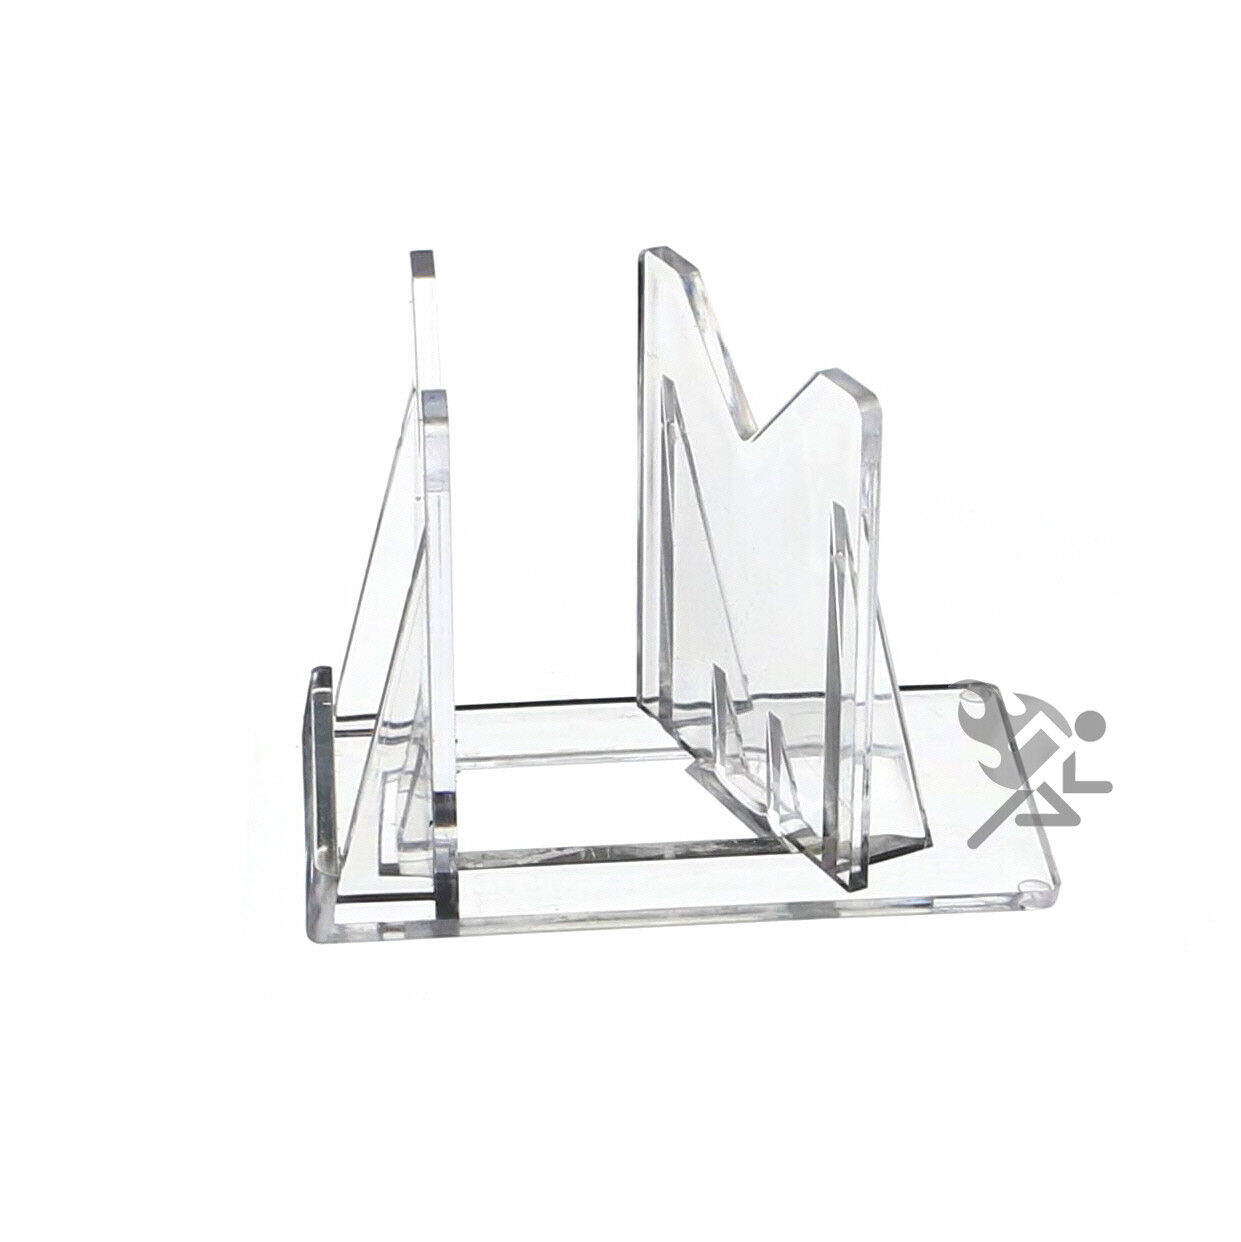 Fishing Lure Display Stand Easels 10 Pack OnFireGuy 010-11099 - фотография #3